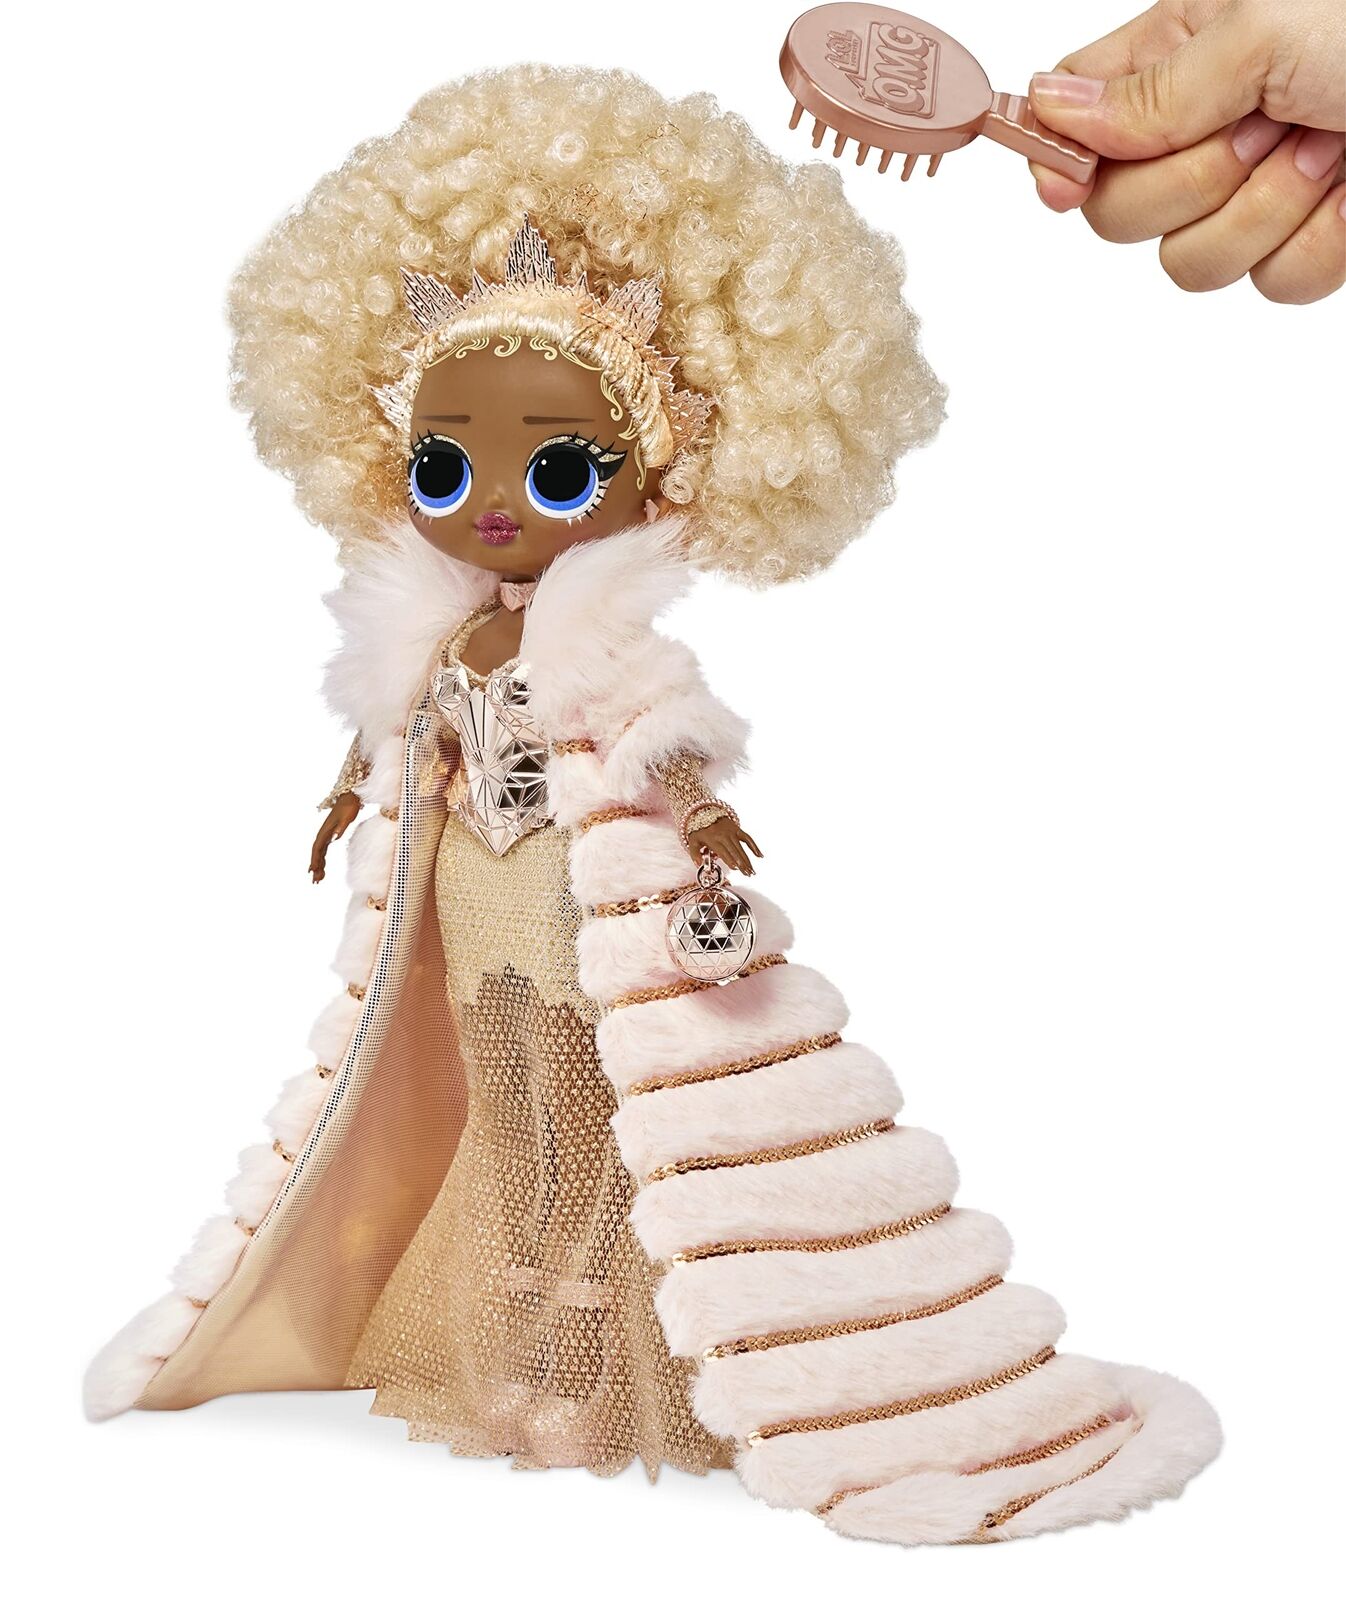 LOL Surprise Holiday OMG 2021 Collector NYE Queen Fashion Doll with Gold Fash...